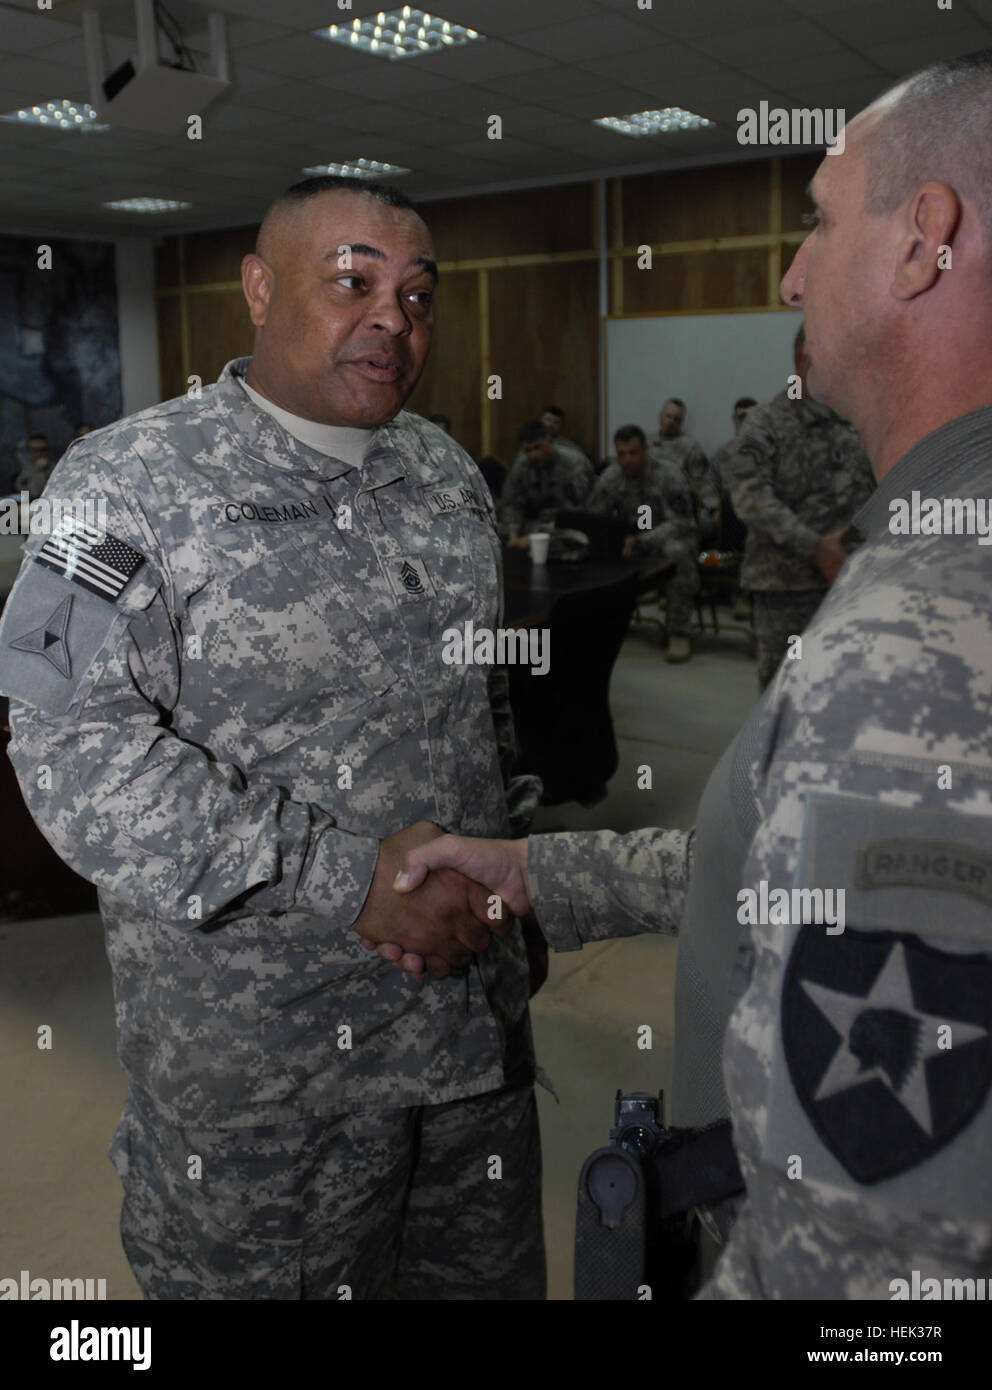 Command Sgt. Maj. Arthur Coleman Jr., the III Corps command sergeant major, shakes the hand of Staff Sgt. Jorge Fabian, a squad leader with Company C, 2nd Battalion, 23rd Infantry Regiment, 4th Stryker Brigade Combat Team, 2nd Infantry Division, during a coin presentation here May 10. Fabian, a Mendoza, Argentina native, received a coin for his determination and commitment to graduating Ranger School and passing his knowledge to lower-enlisted Soldiers in his unit who also hope to attend Ranger School. Ranger graduate receives III Corps CSM coin ... and more 278785 Stock Photo